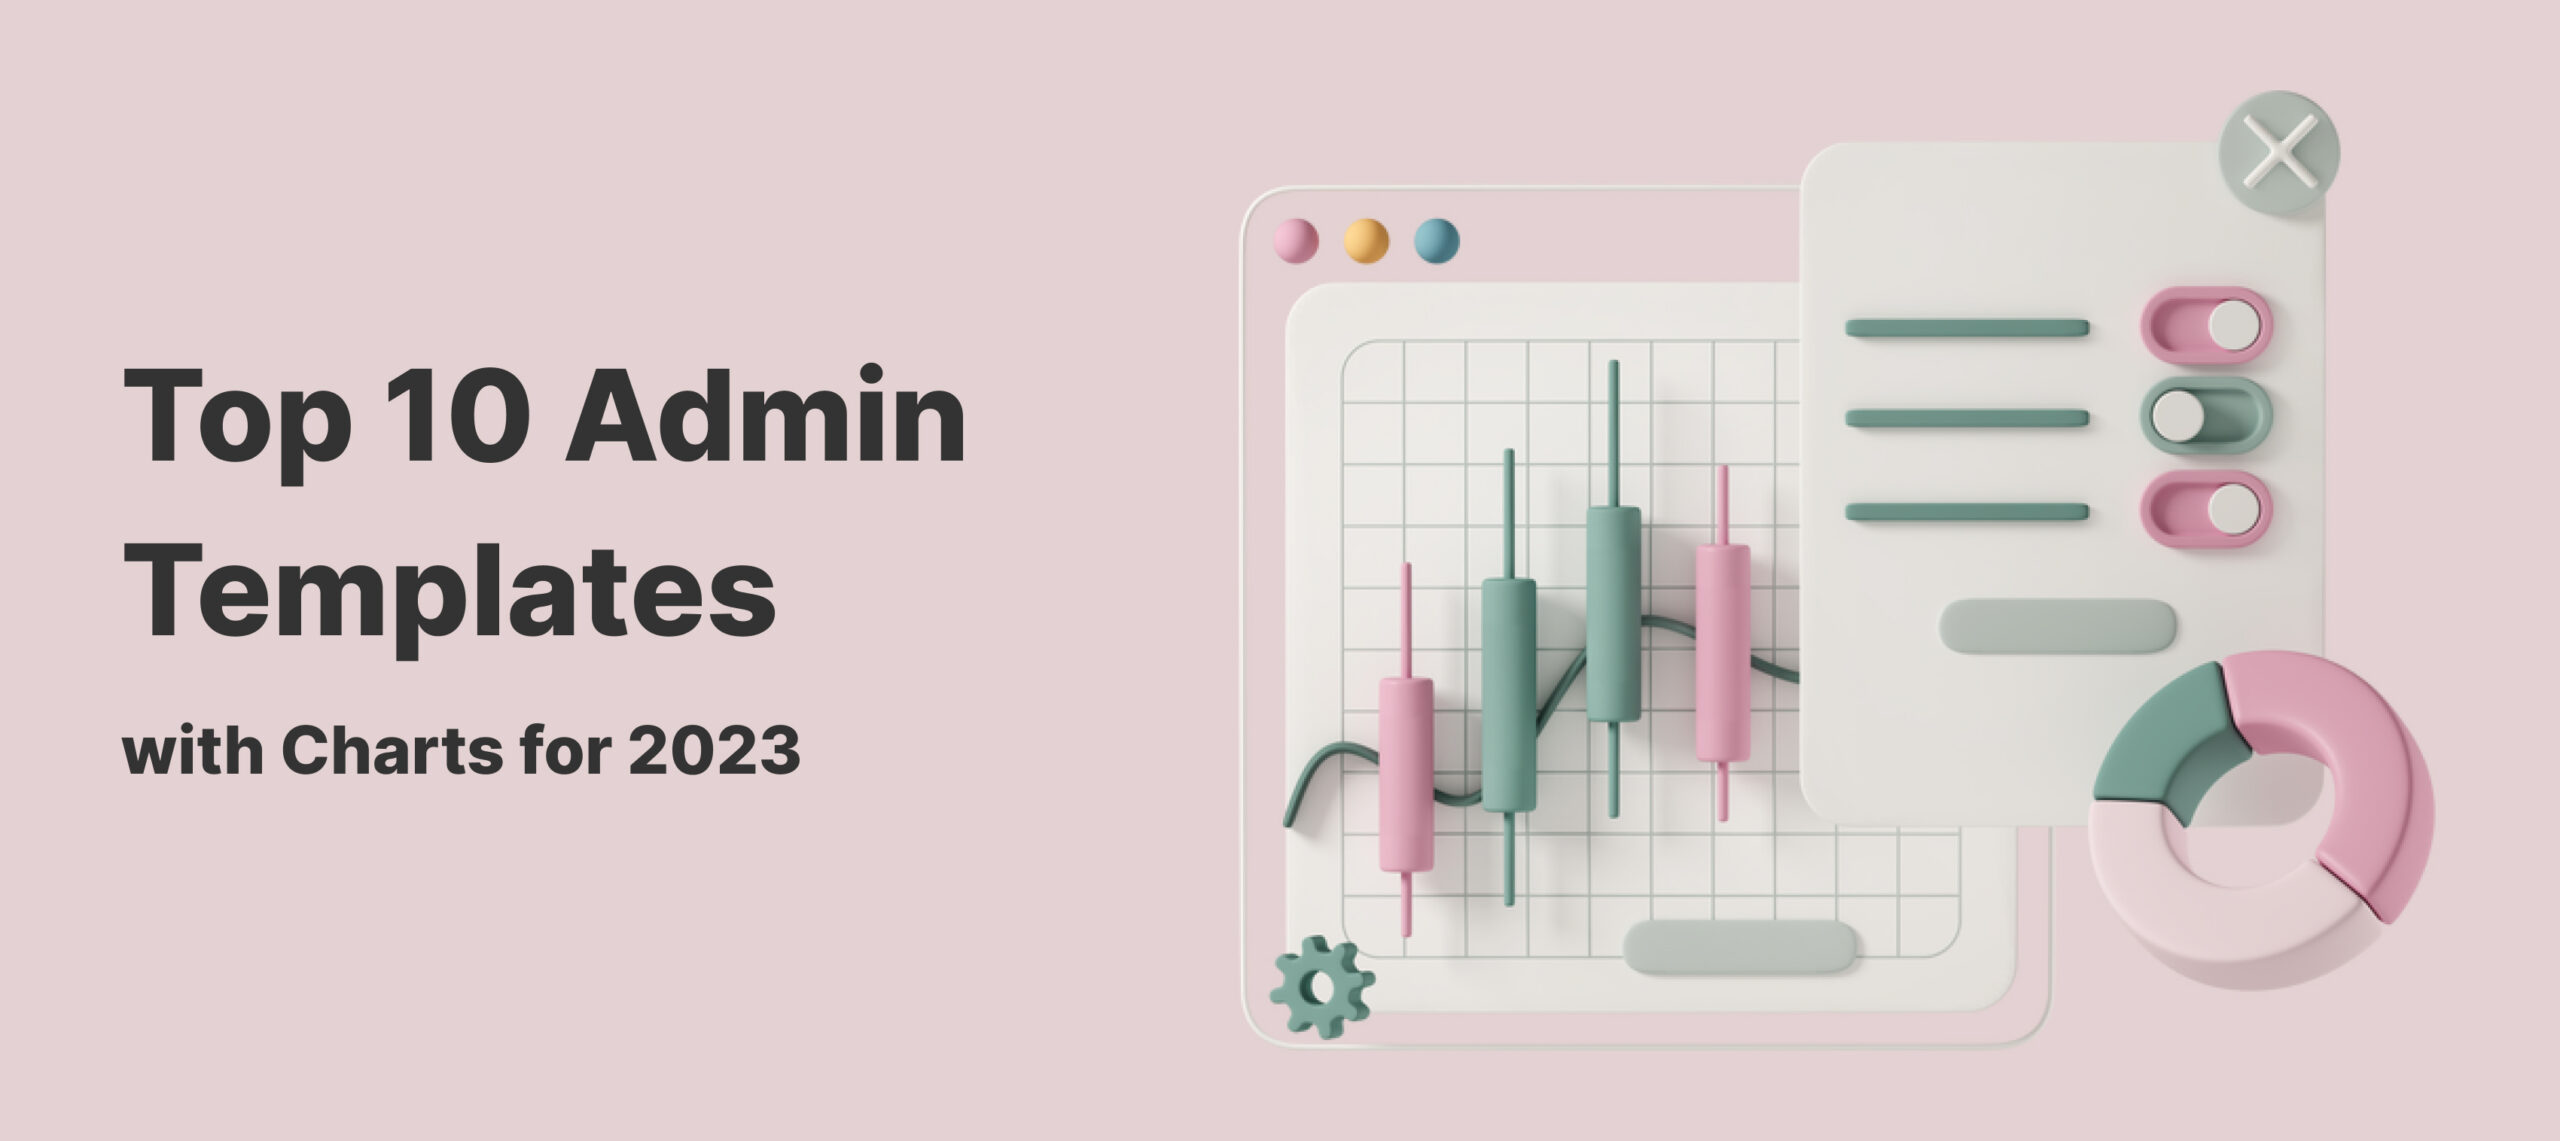  Top 10 Admin Templates with Charts for 2023